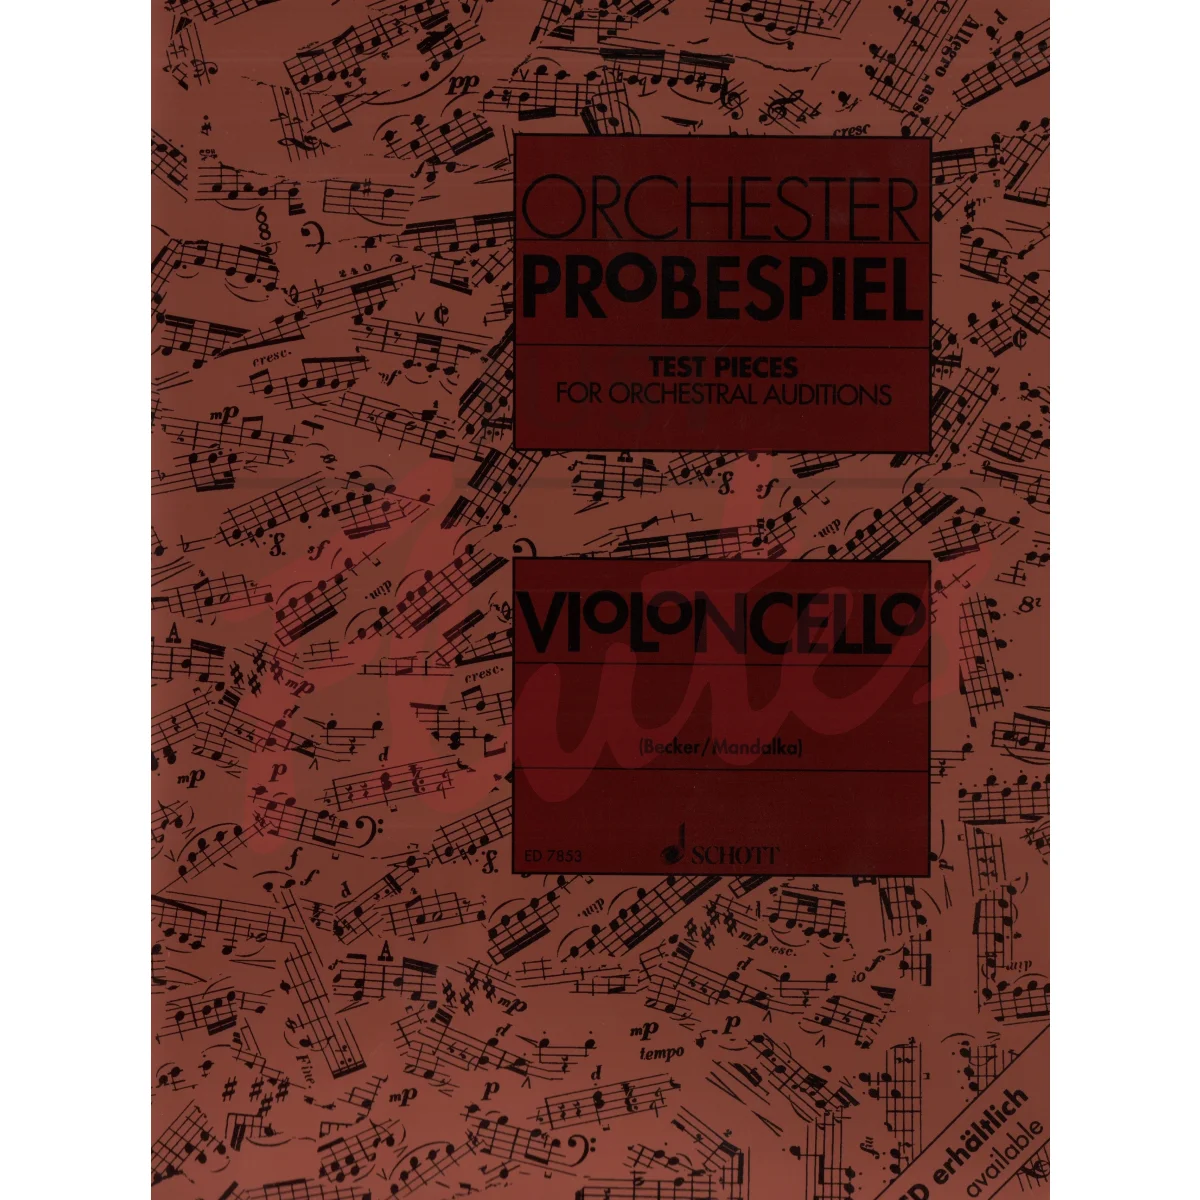 Orchester-Probespiel: Test Pieces for Orchestral Auditions for Cello